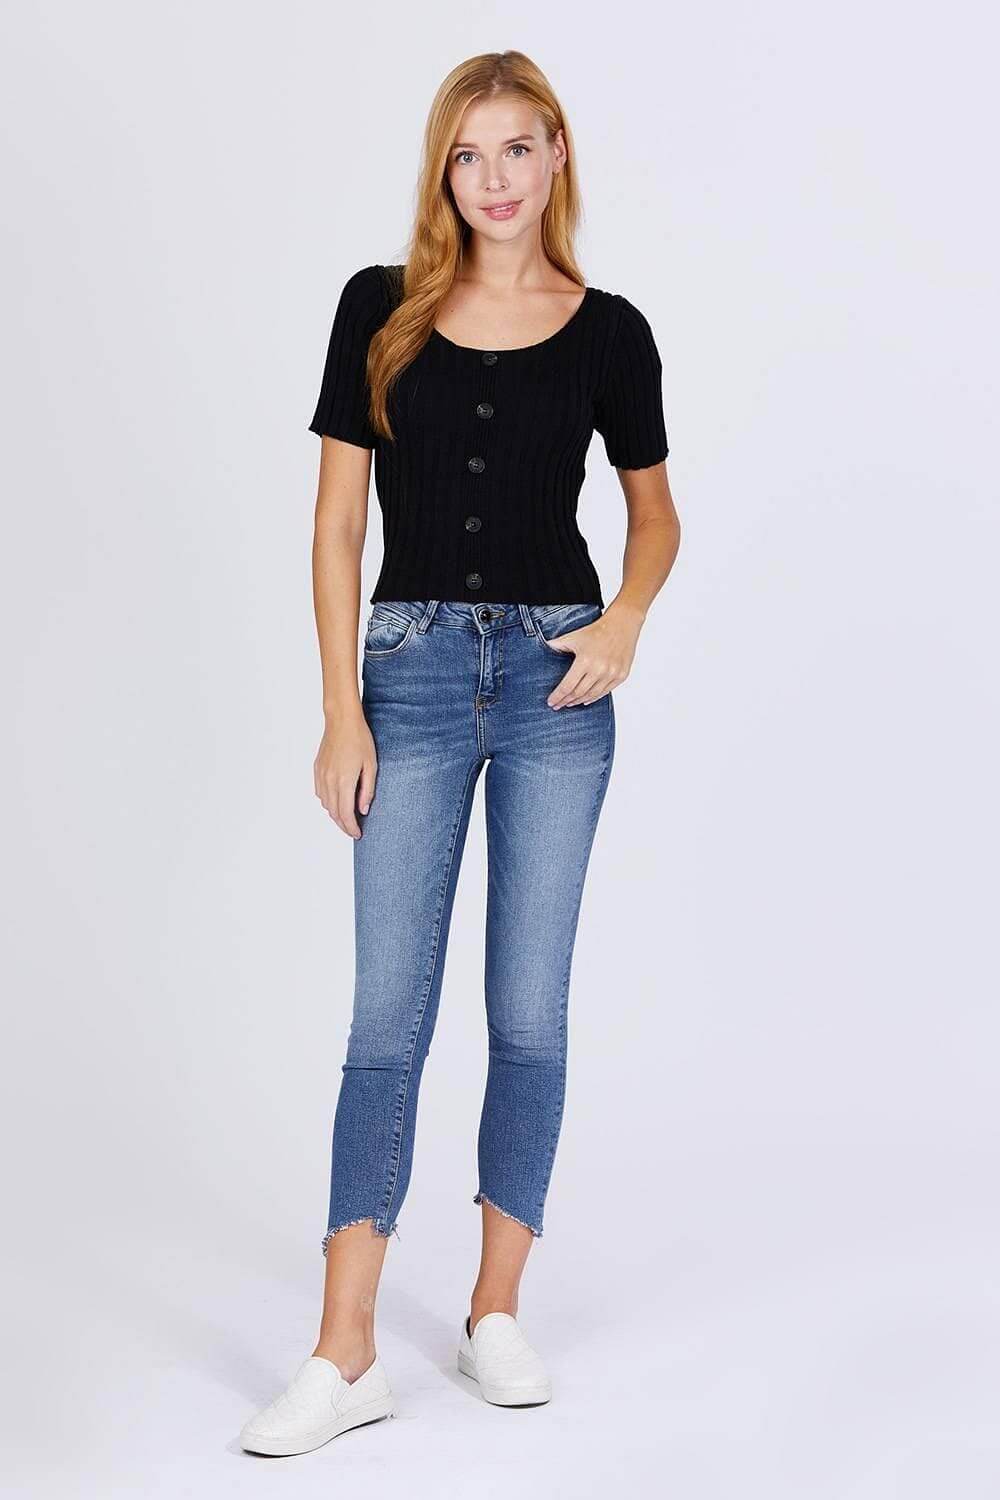 Black Short Sleeve Rib Knitted Sweater - Shopping Therapy M Top